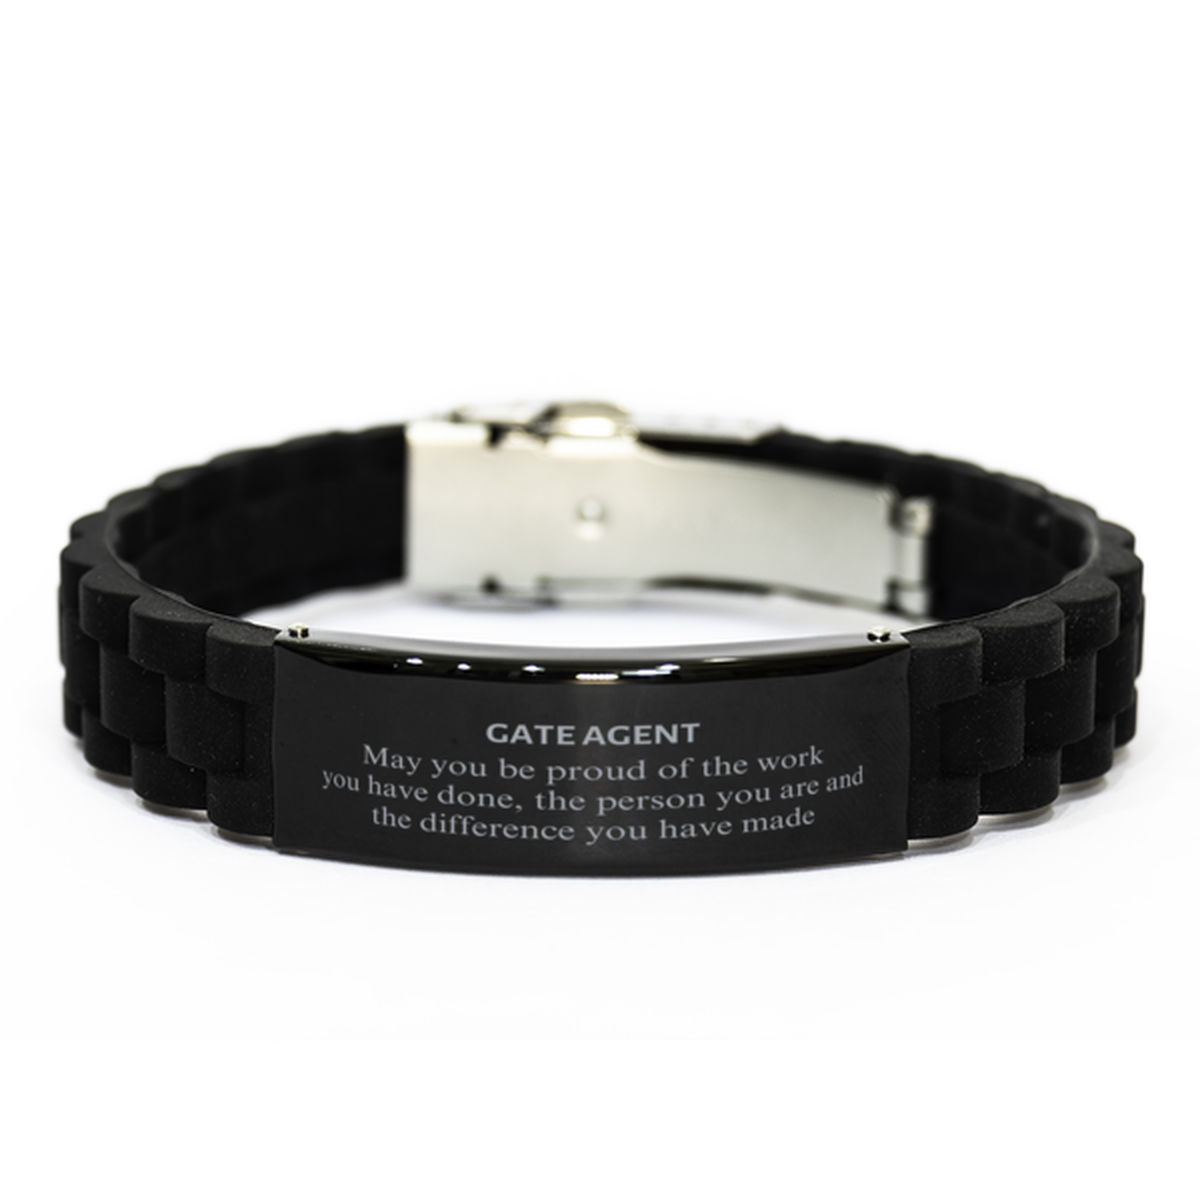 Gate Agent May you be proud of the work you have done, Retirement Gate Agent Black Glidelock Clasp Bracelet for Colleague Appreciation Gifts Amazing for Gate Agent